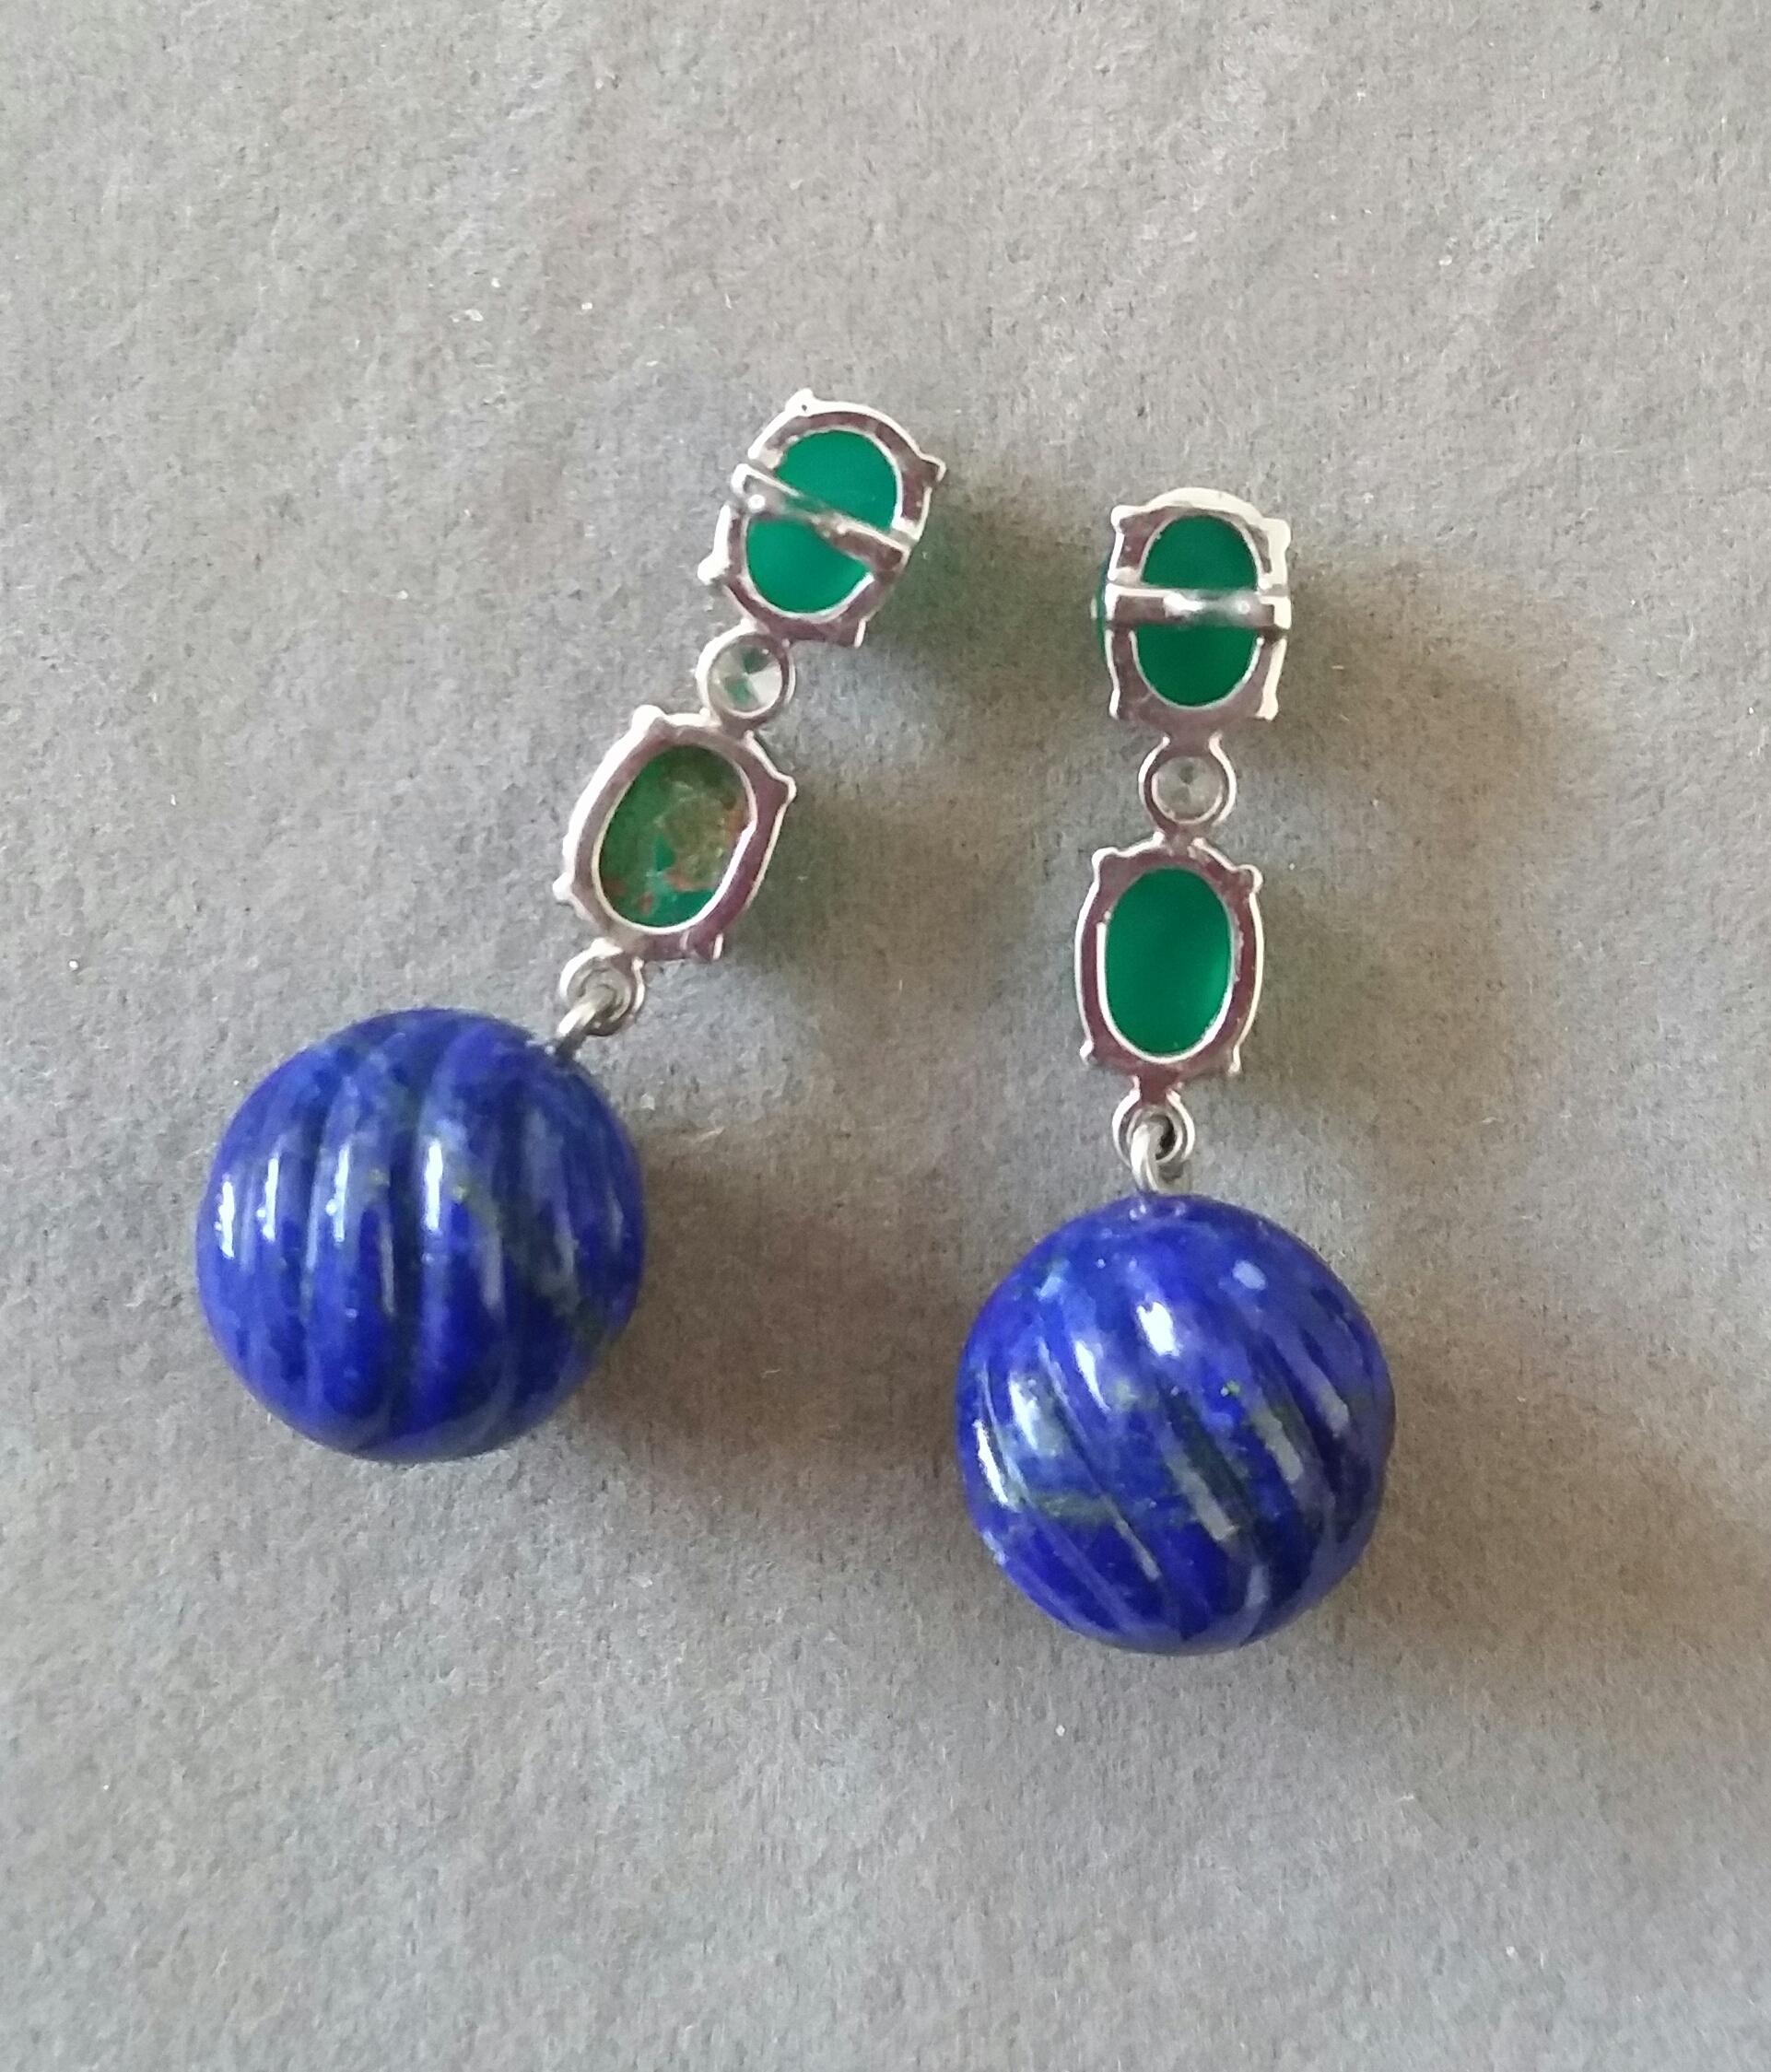 Elegant and completely handmade Earrings consisting of an upper part of 2 oval shape Green Onyx cabs of 5 mm x 7 mm set together in 14 Kt white gold with a  small diamond in the middle, at the bottom 2 Natural Lapis Lazuli Carved Round Beads